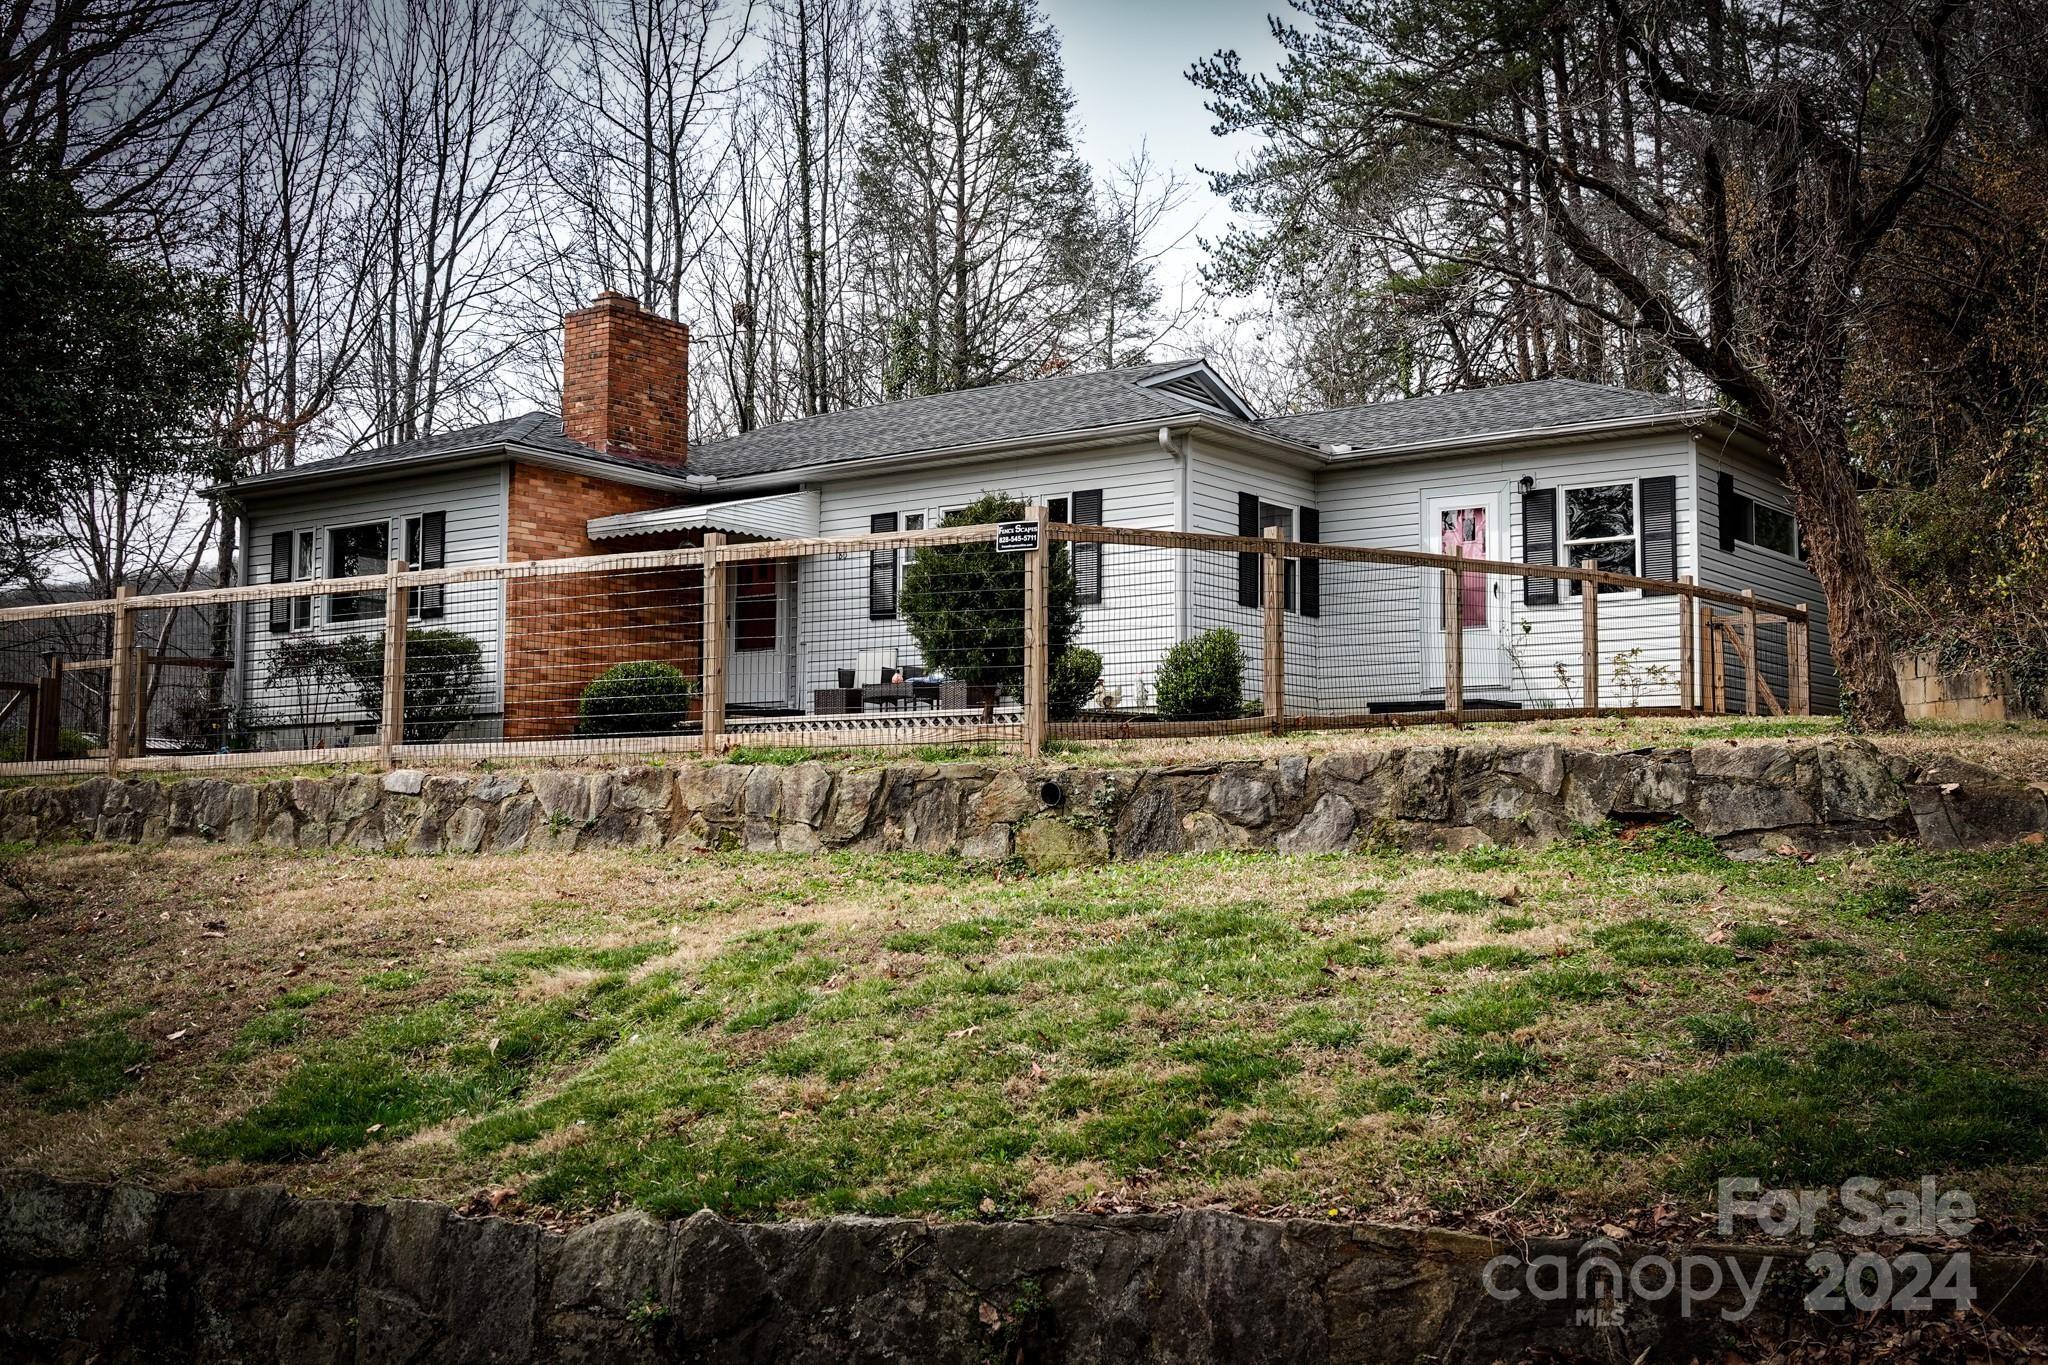 Property Image for 180 Hidden Hill Road